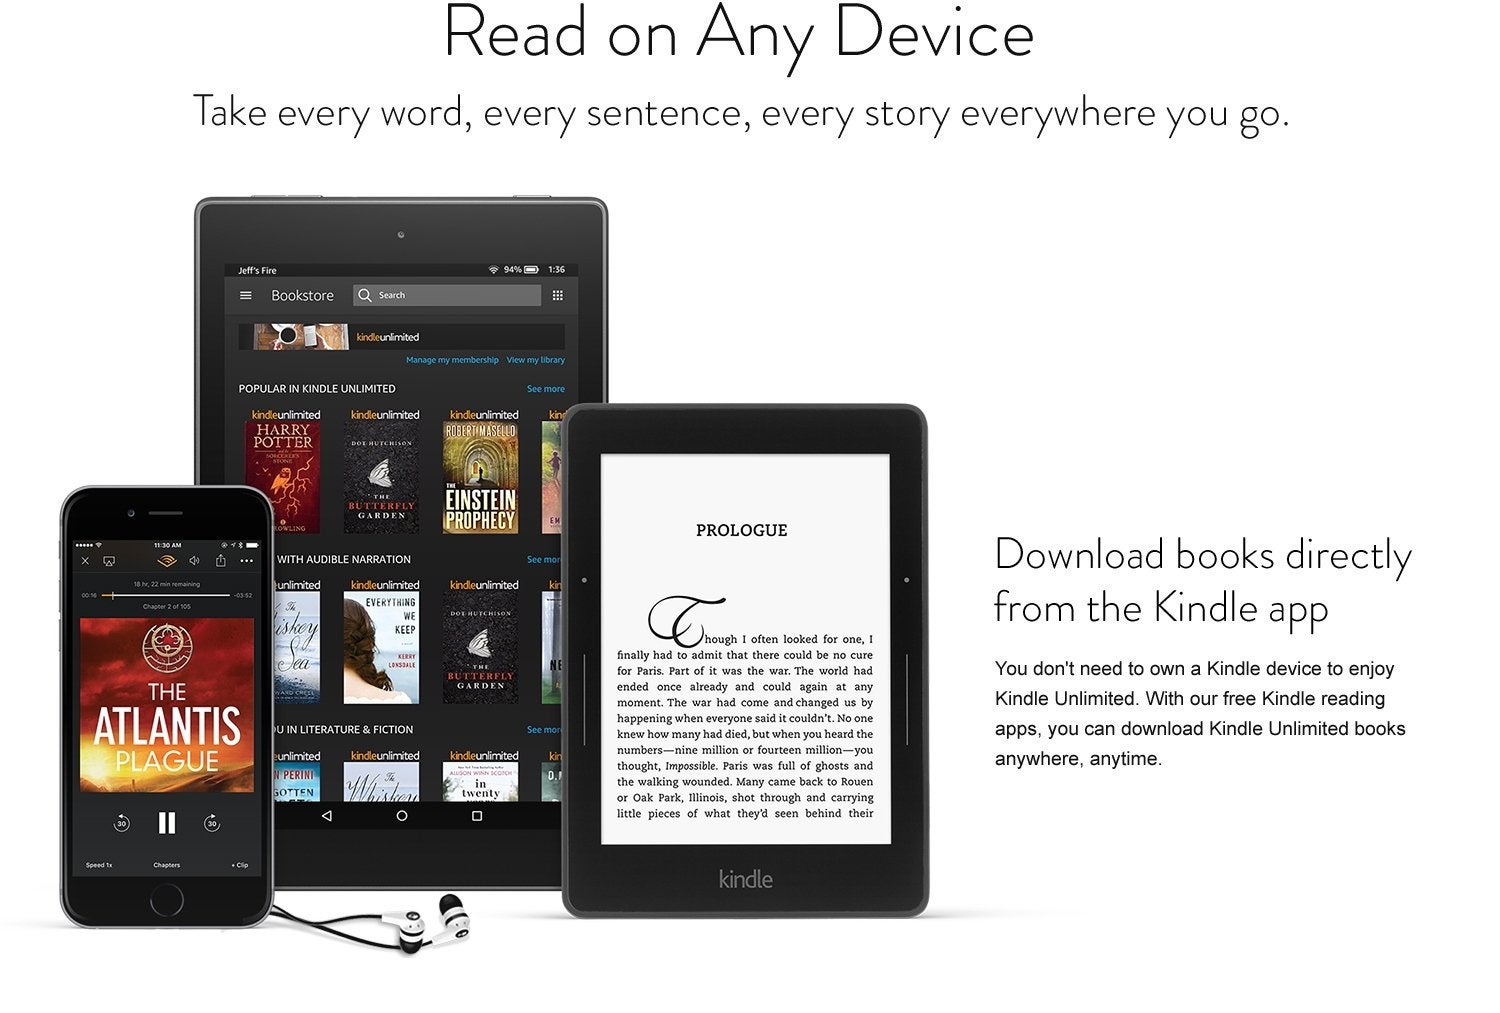 kindle unlimited price for publishers